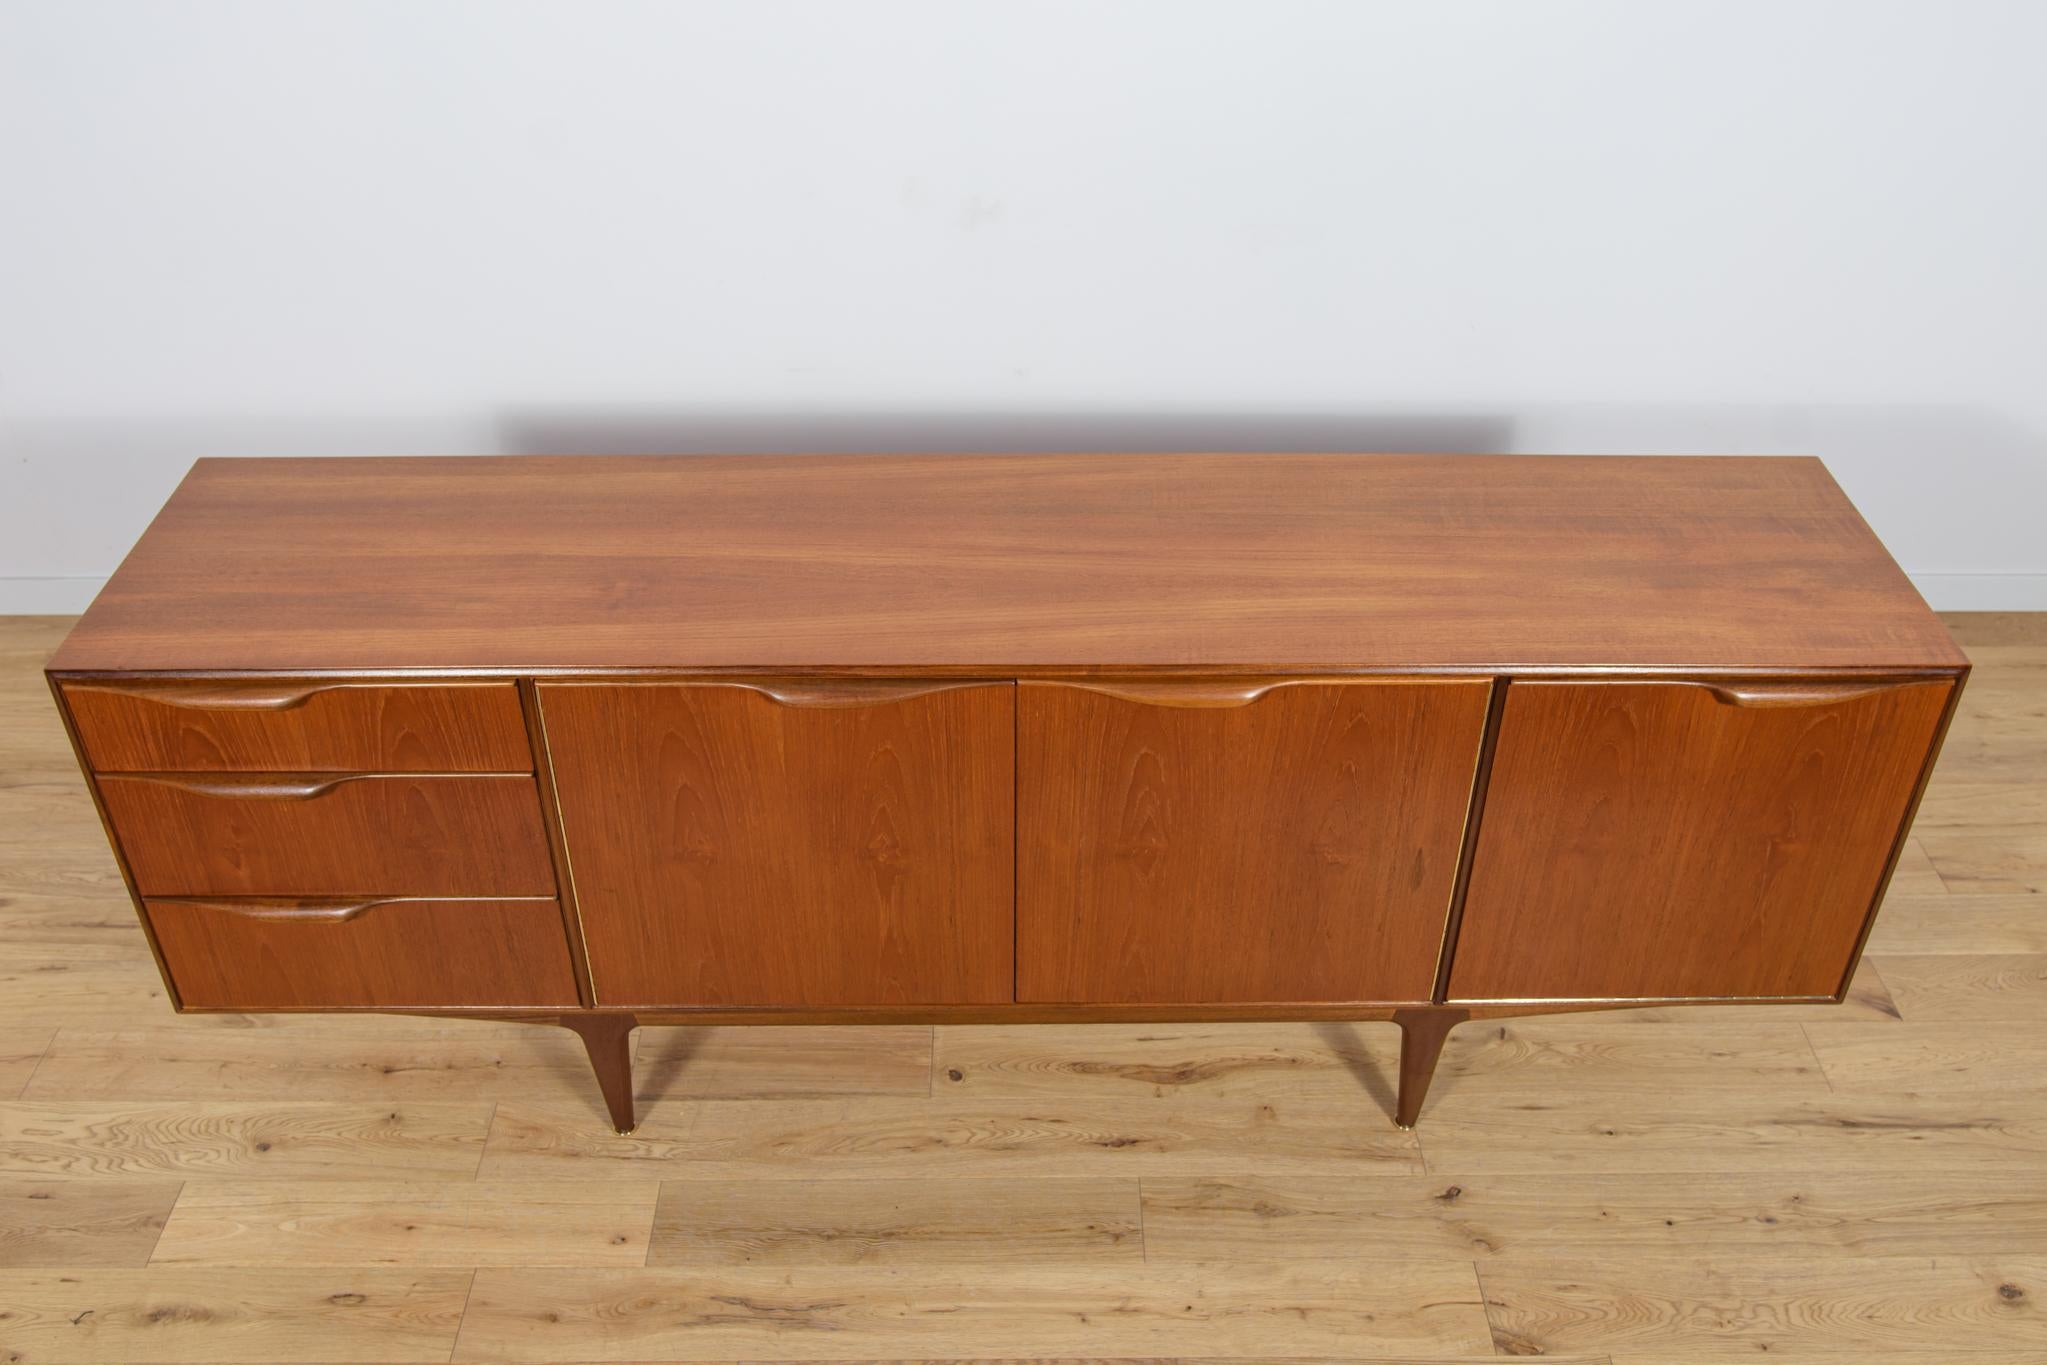 British Mid-Century Teak Sideboard from McIntosh, 1960s For Sale